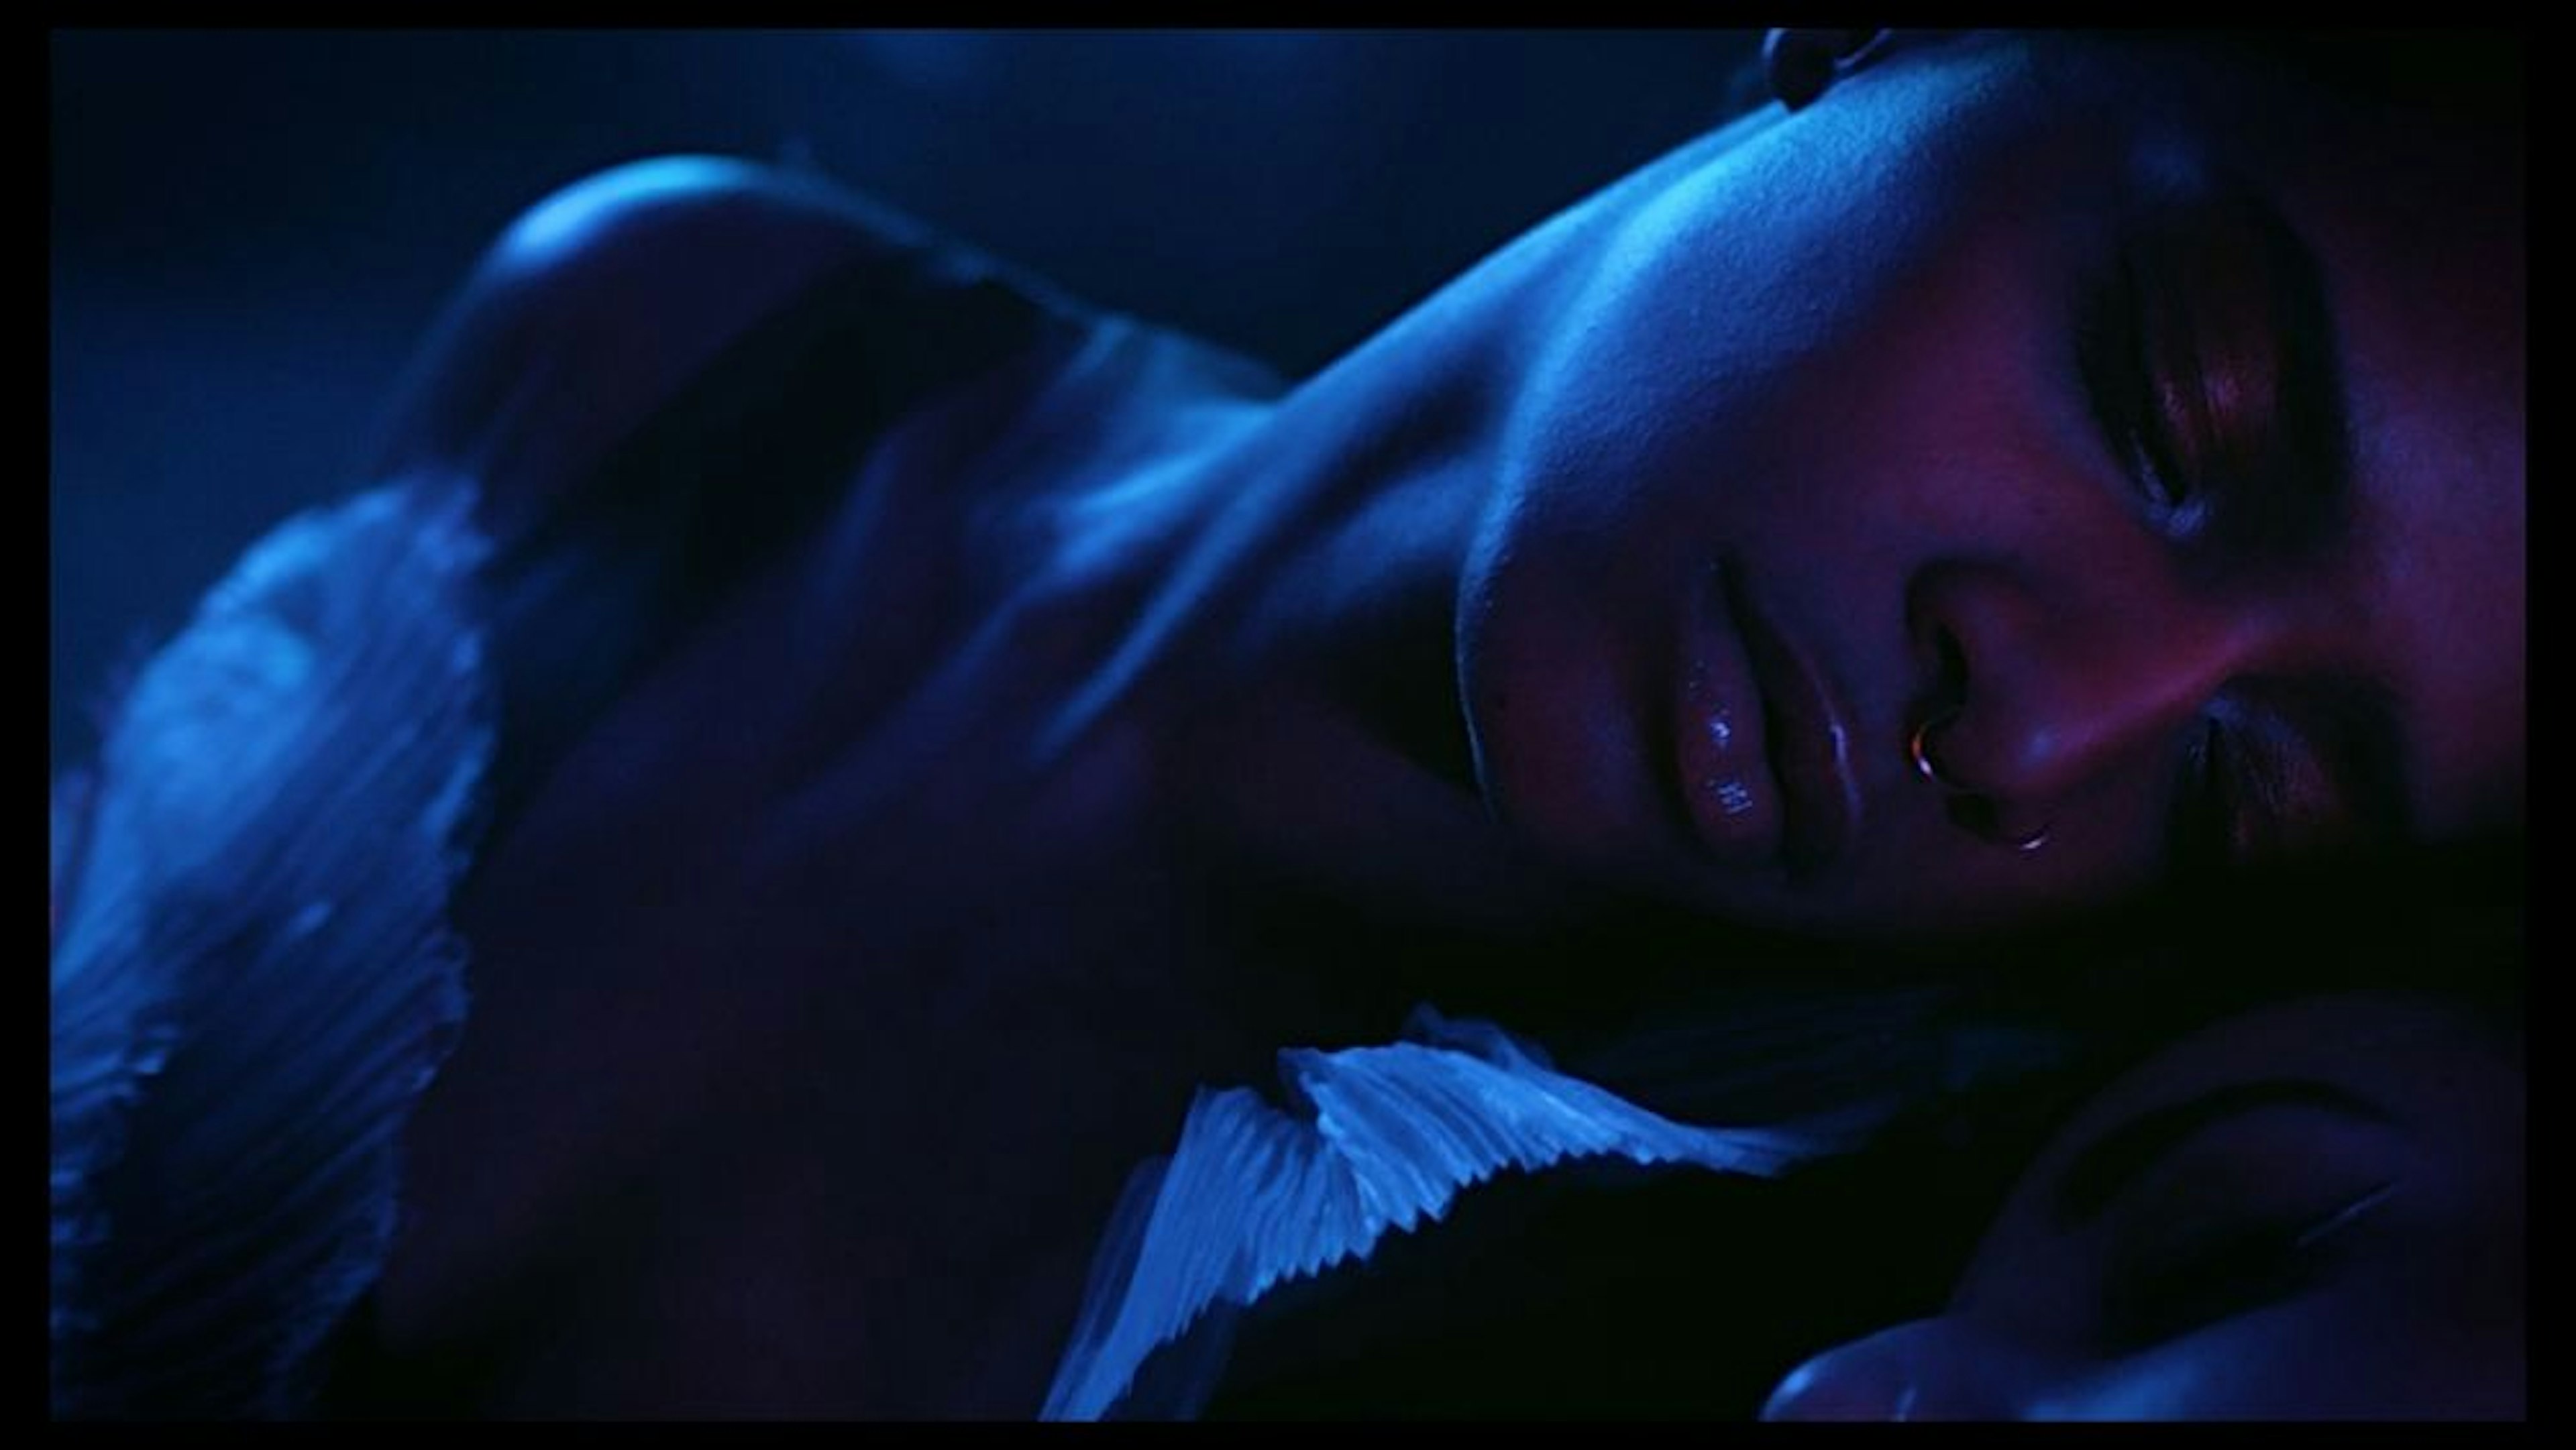 Close-up of a dark skinned woman resting her head gently on another person who is slightly visible. They are both lit by soft red and blue tones with a white key light illuminating the sides of their faces. 